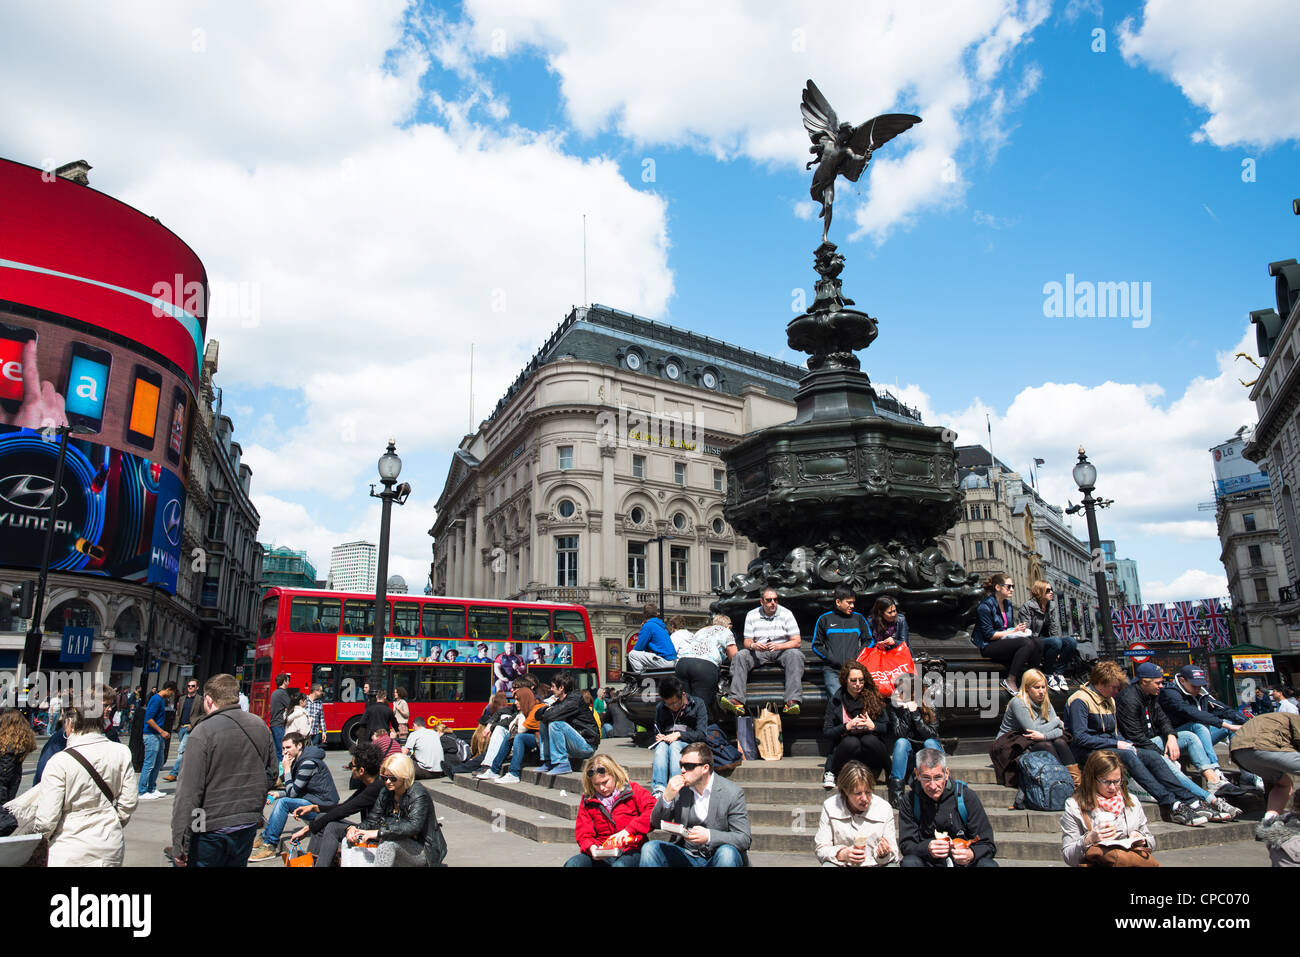 Piccadilly circus, London, England. Stock Photo